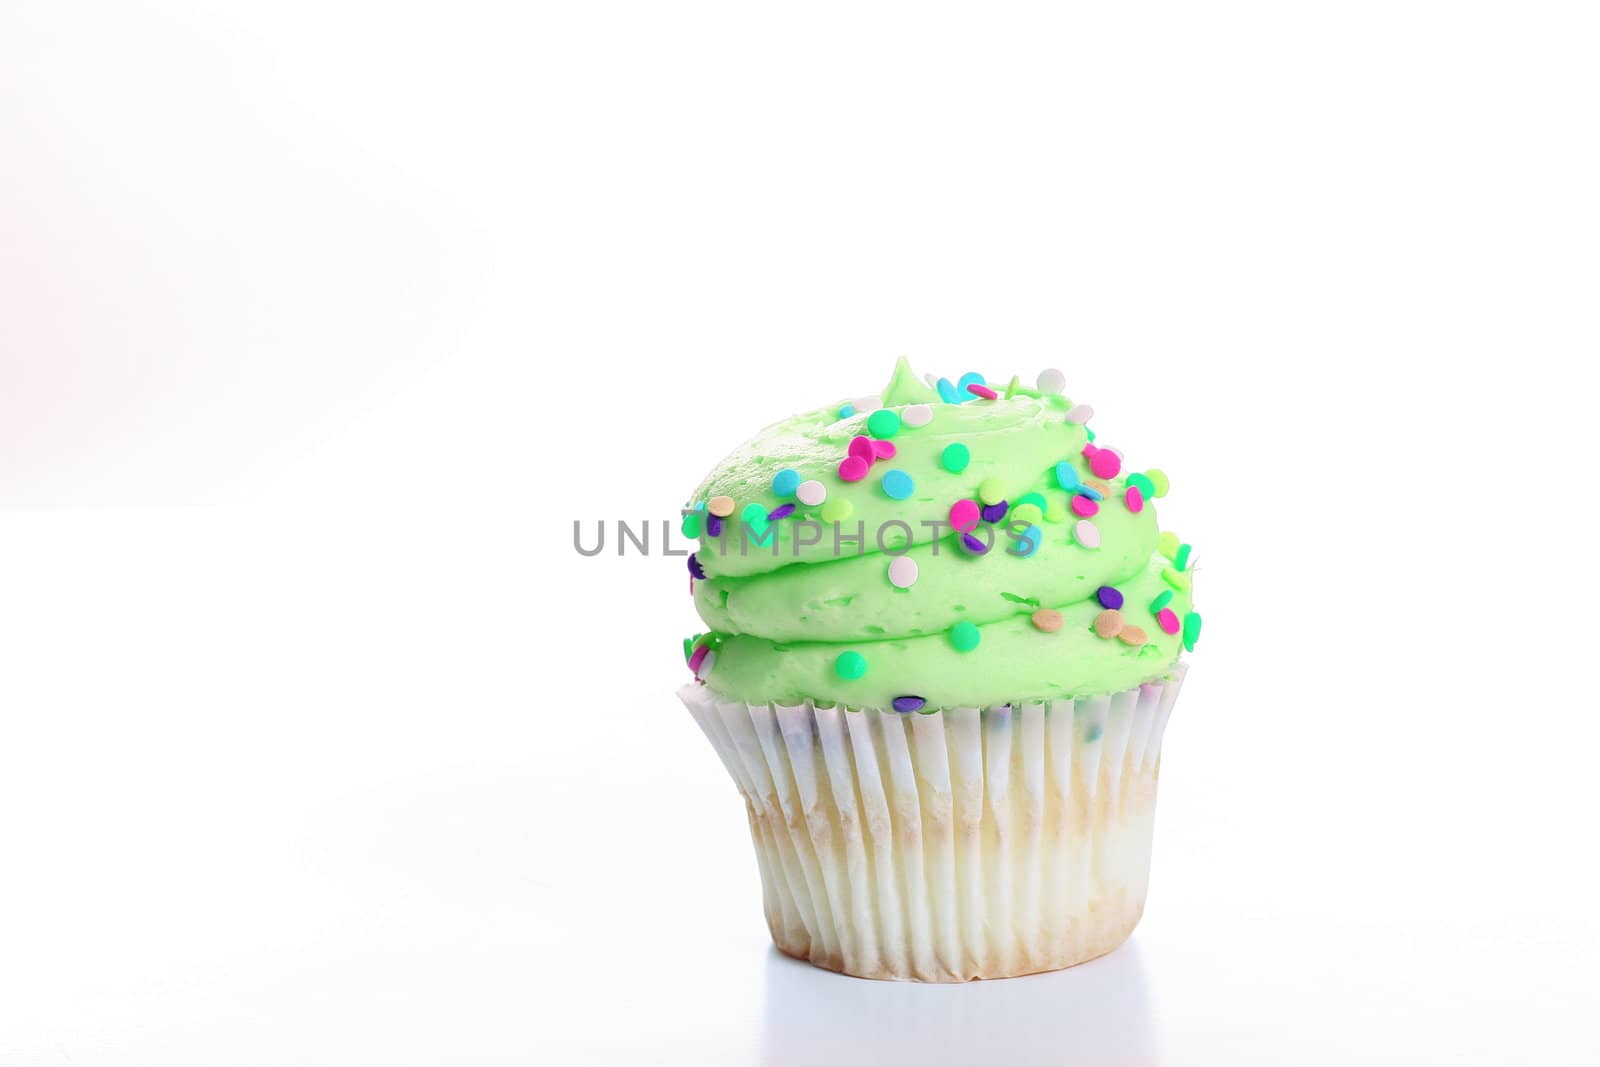 shot of vanilla cupcake with lime green frosting by creativestock